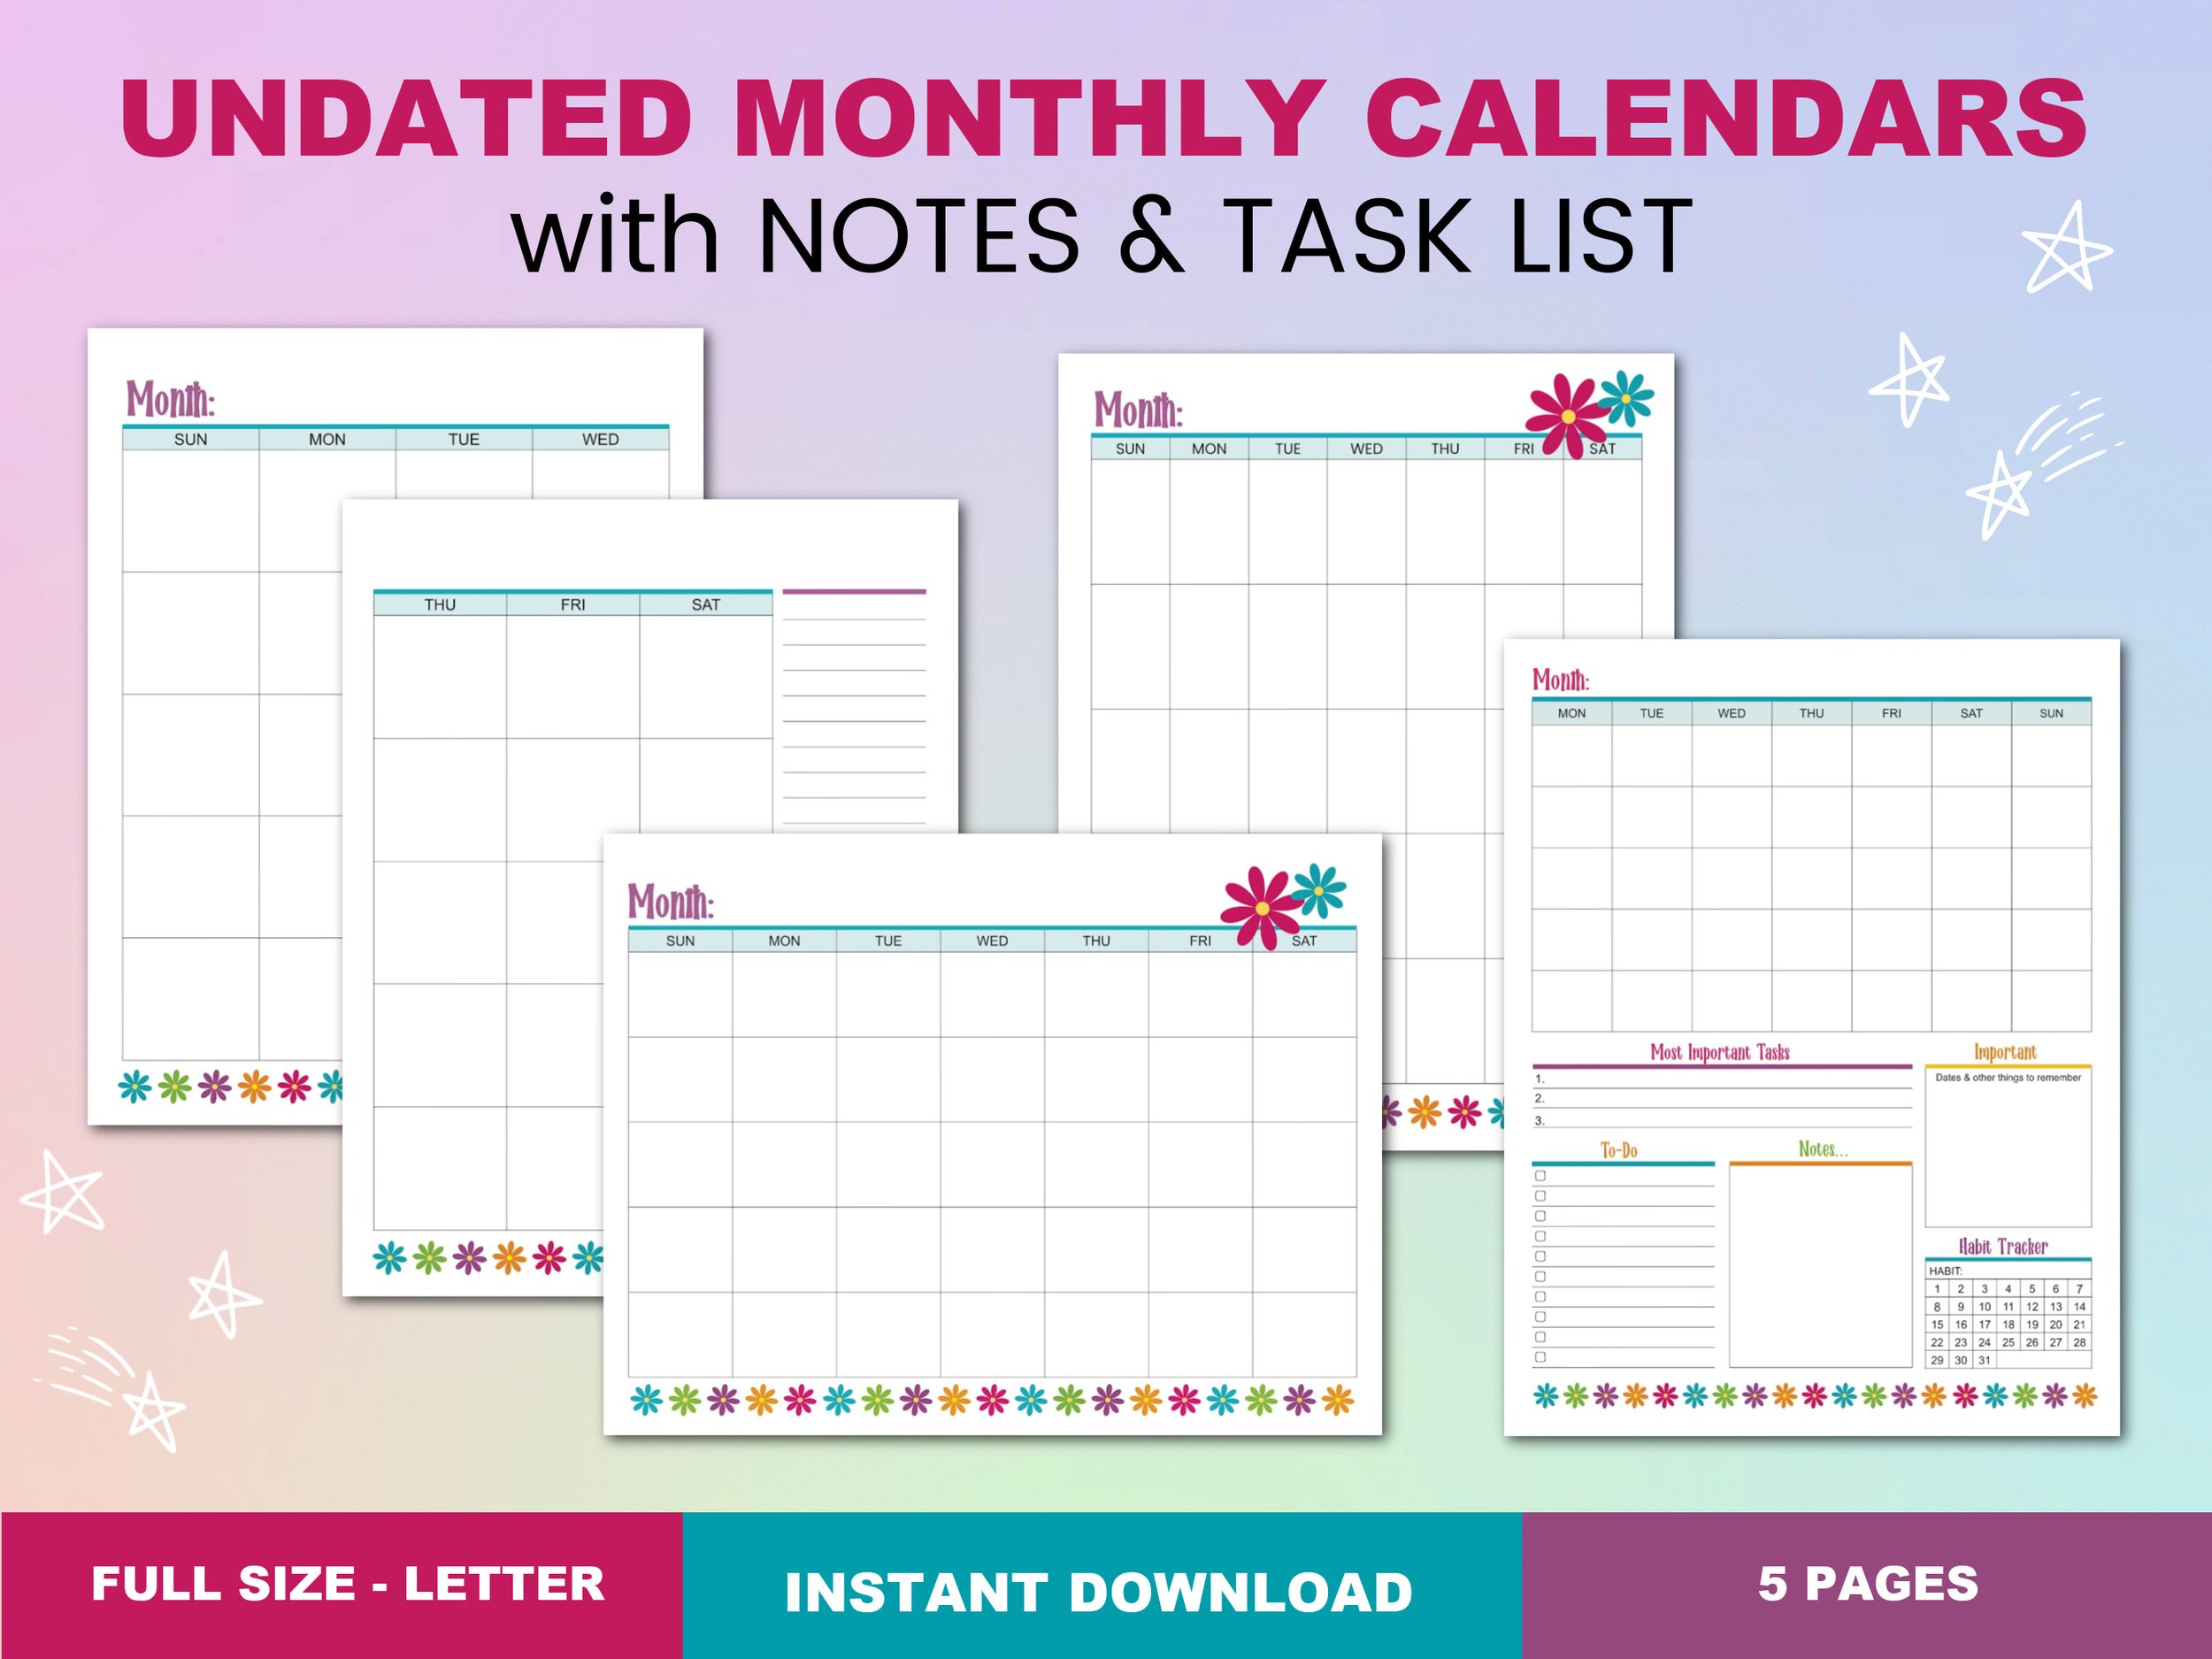 Undated Monthly Calendars with Notes and Task List-1.jpg